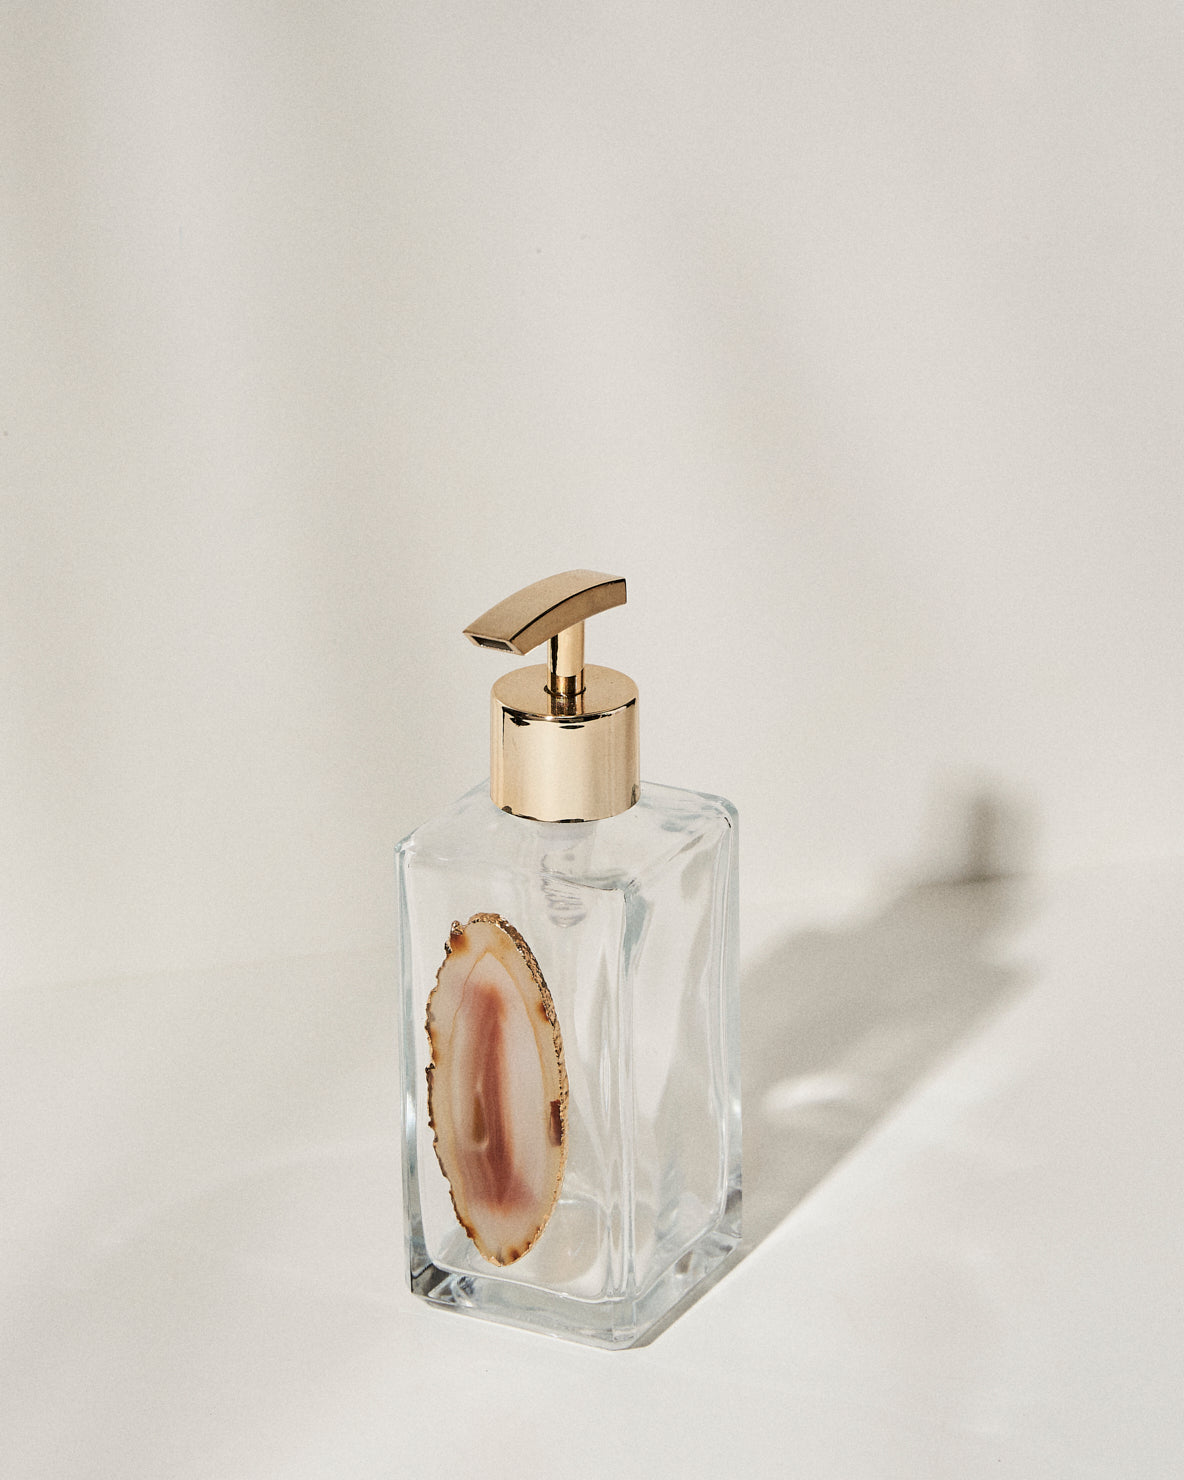 Agate Soap Dispenser - Unique Decor Complement | Nature's Beauty | Large Capacity | Handmade Gift | 5x3” on Average